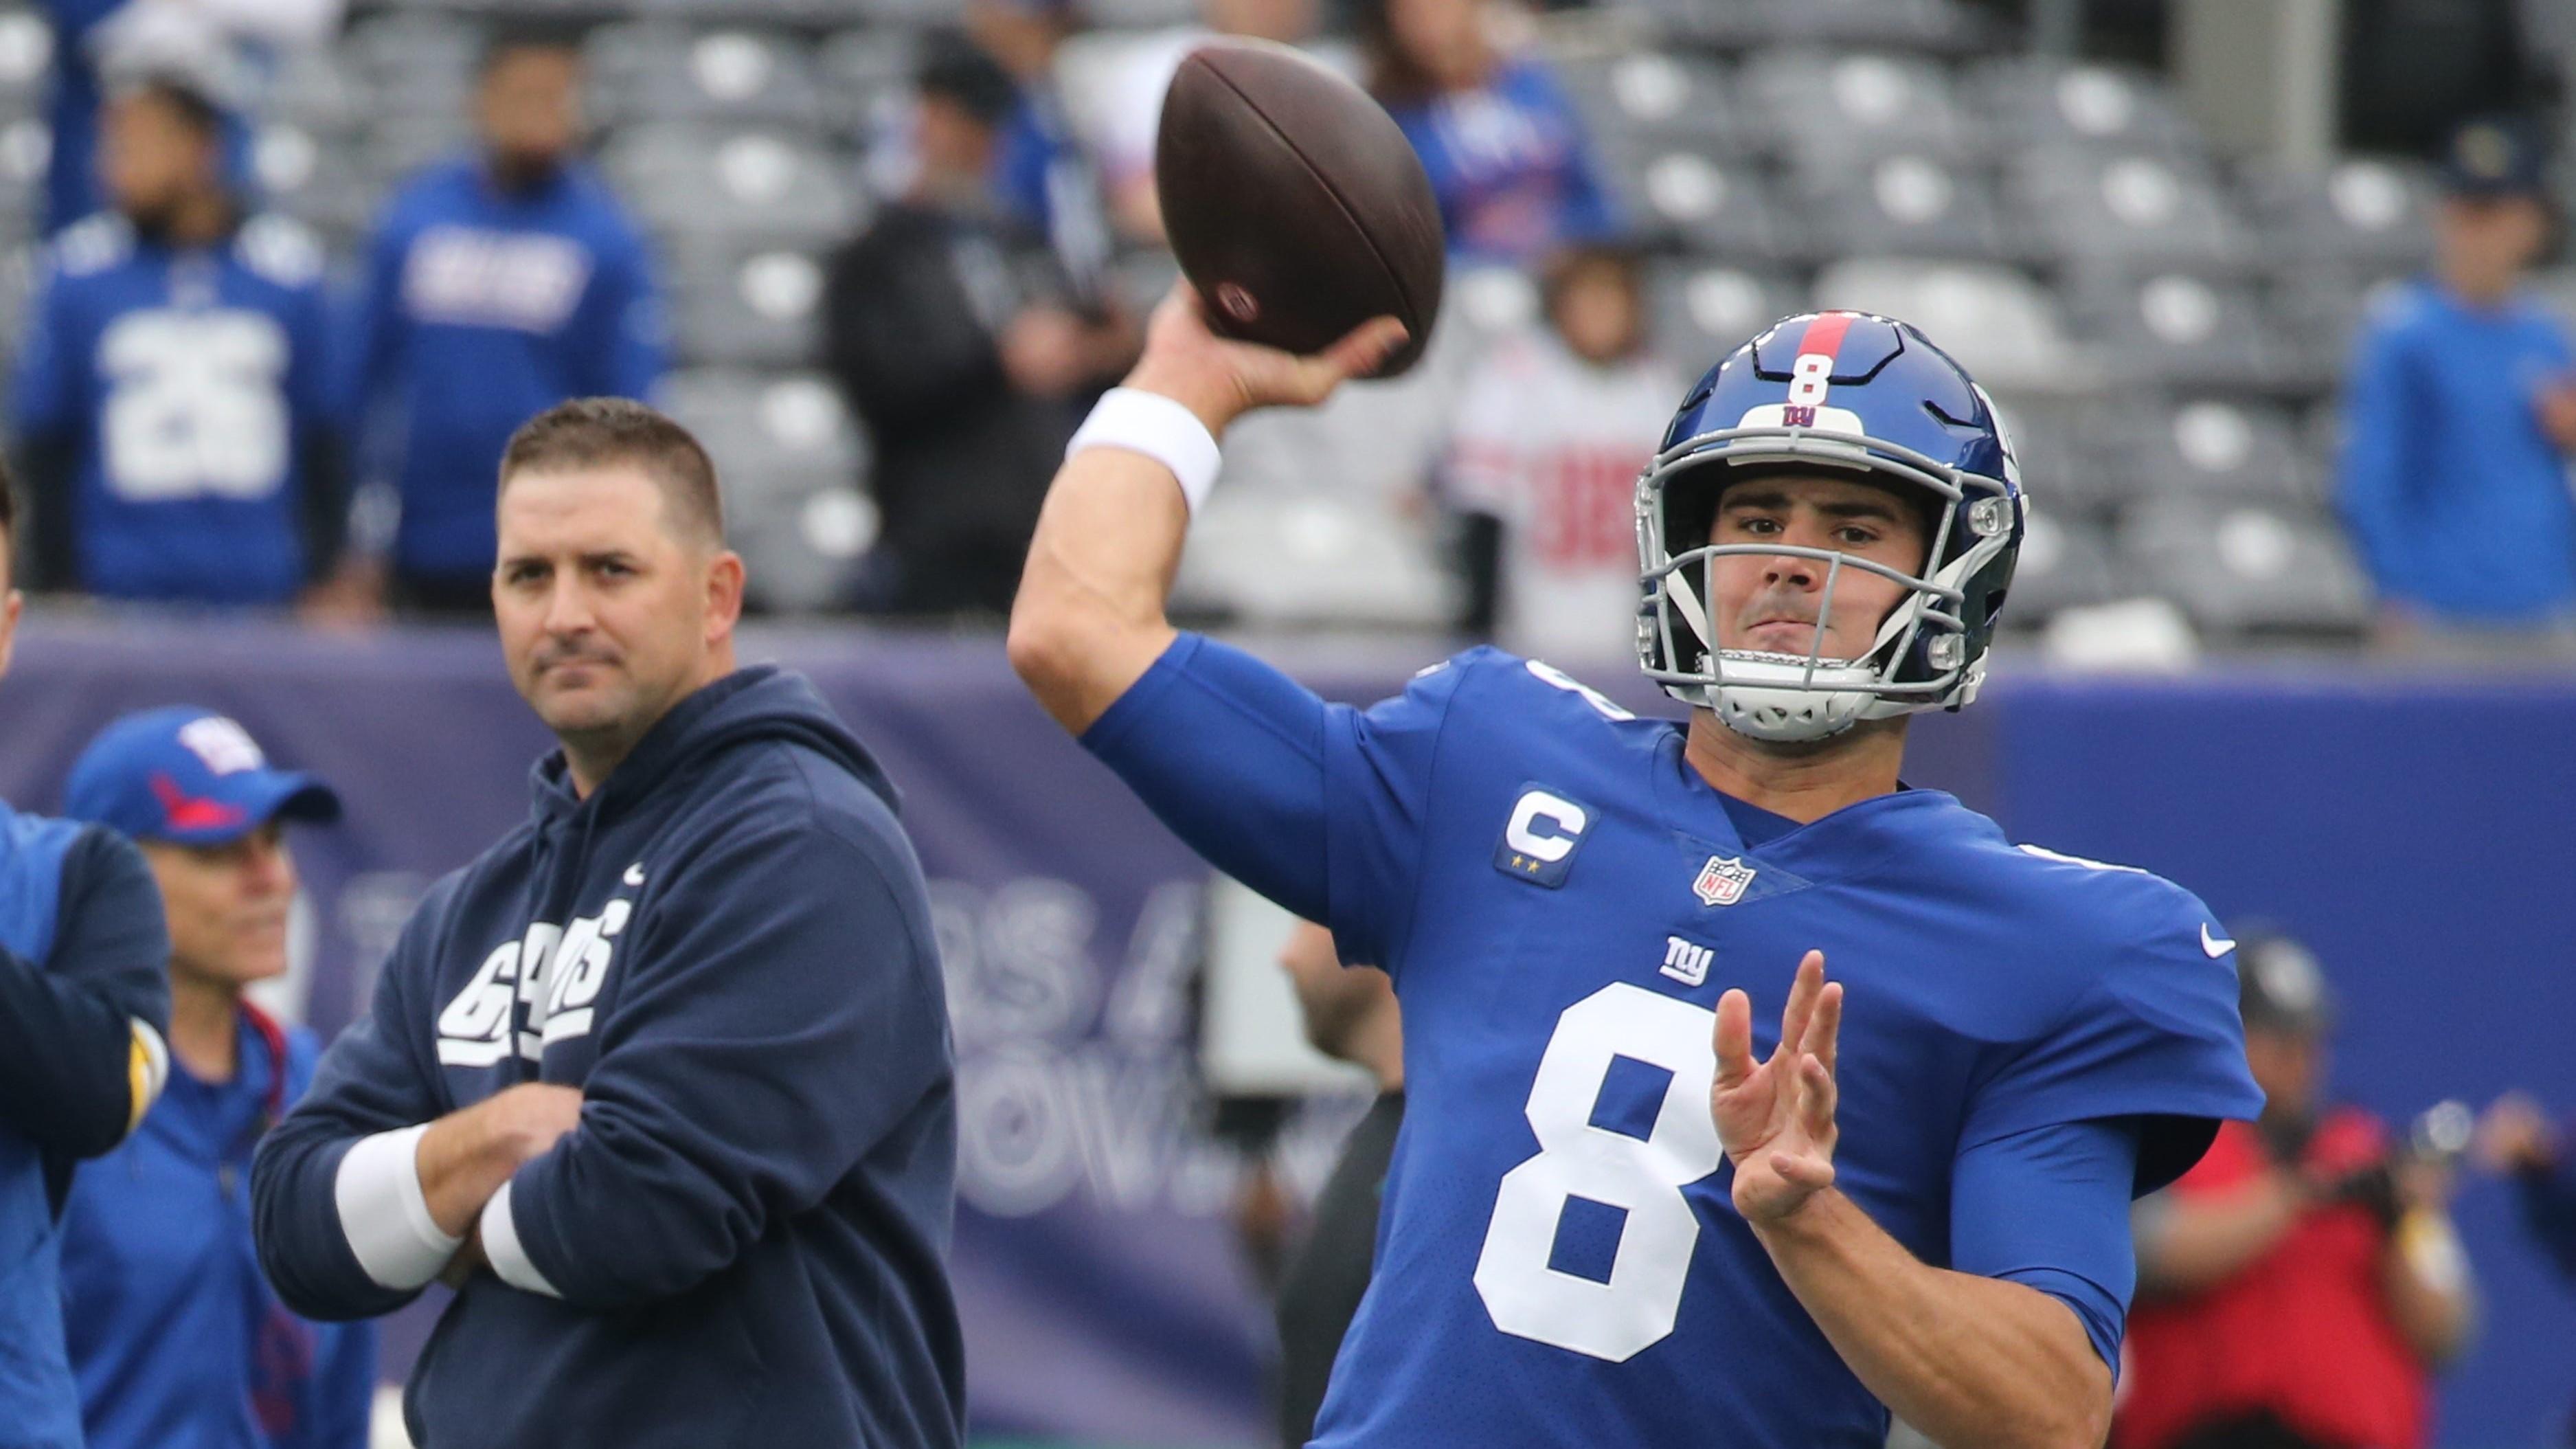 Giants head coach Joe Judge watches as Giants quarterback Daniel Jones warms up before the game as the Carolina Panthers faced the New York Giants at MetLife Stadium / Chris Pedota, NorthJersey.com-Imagn Content Services, LLC